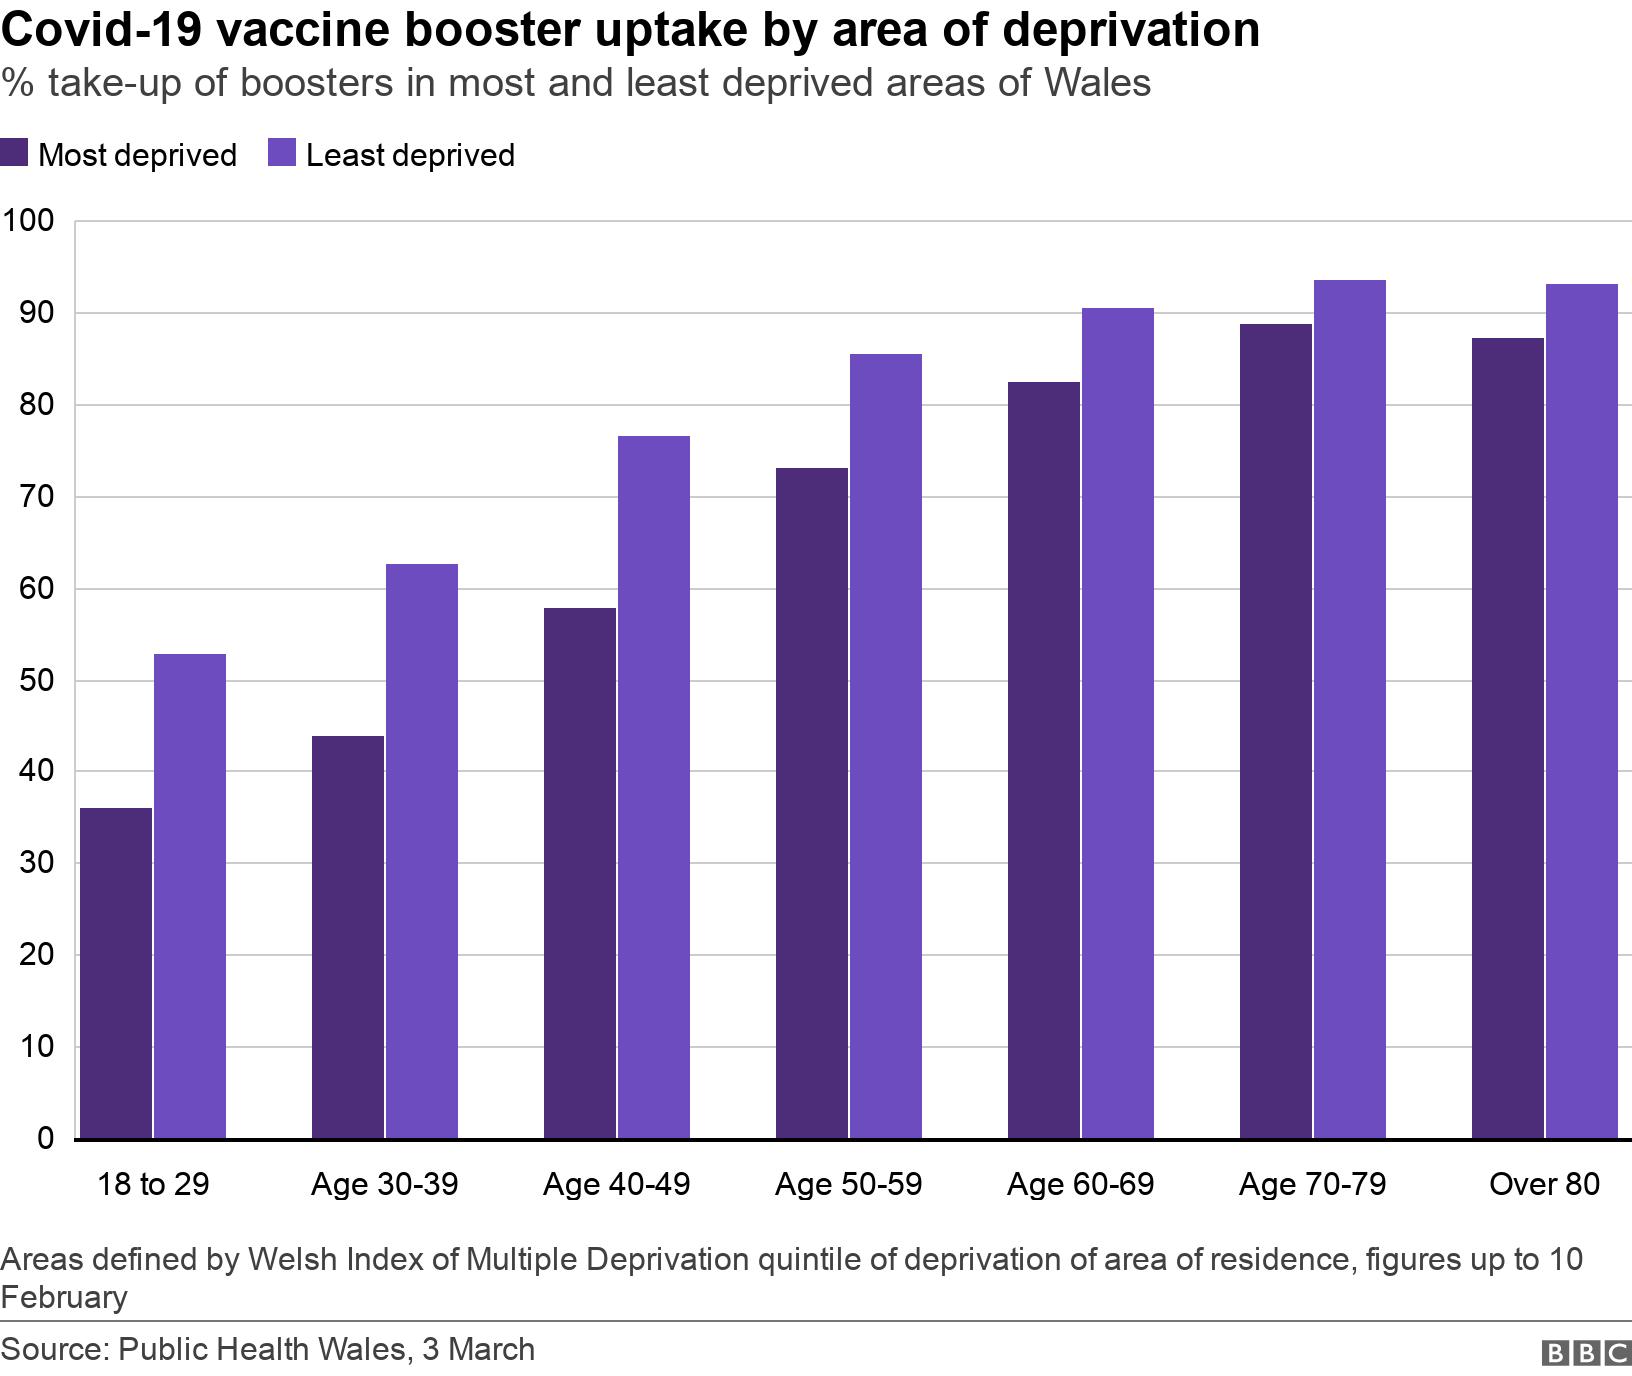 Covid-19 vaccine booster uptake by area of deprivation. % take-up of boosters in most and least deprived areas of Wales.  Areas defined by Welsh Index of Multiple Deprivation quintile of deprivation of area of residence, figures up to 10 February.